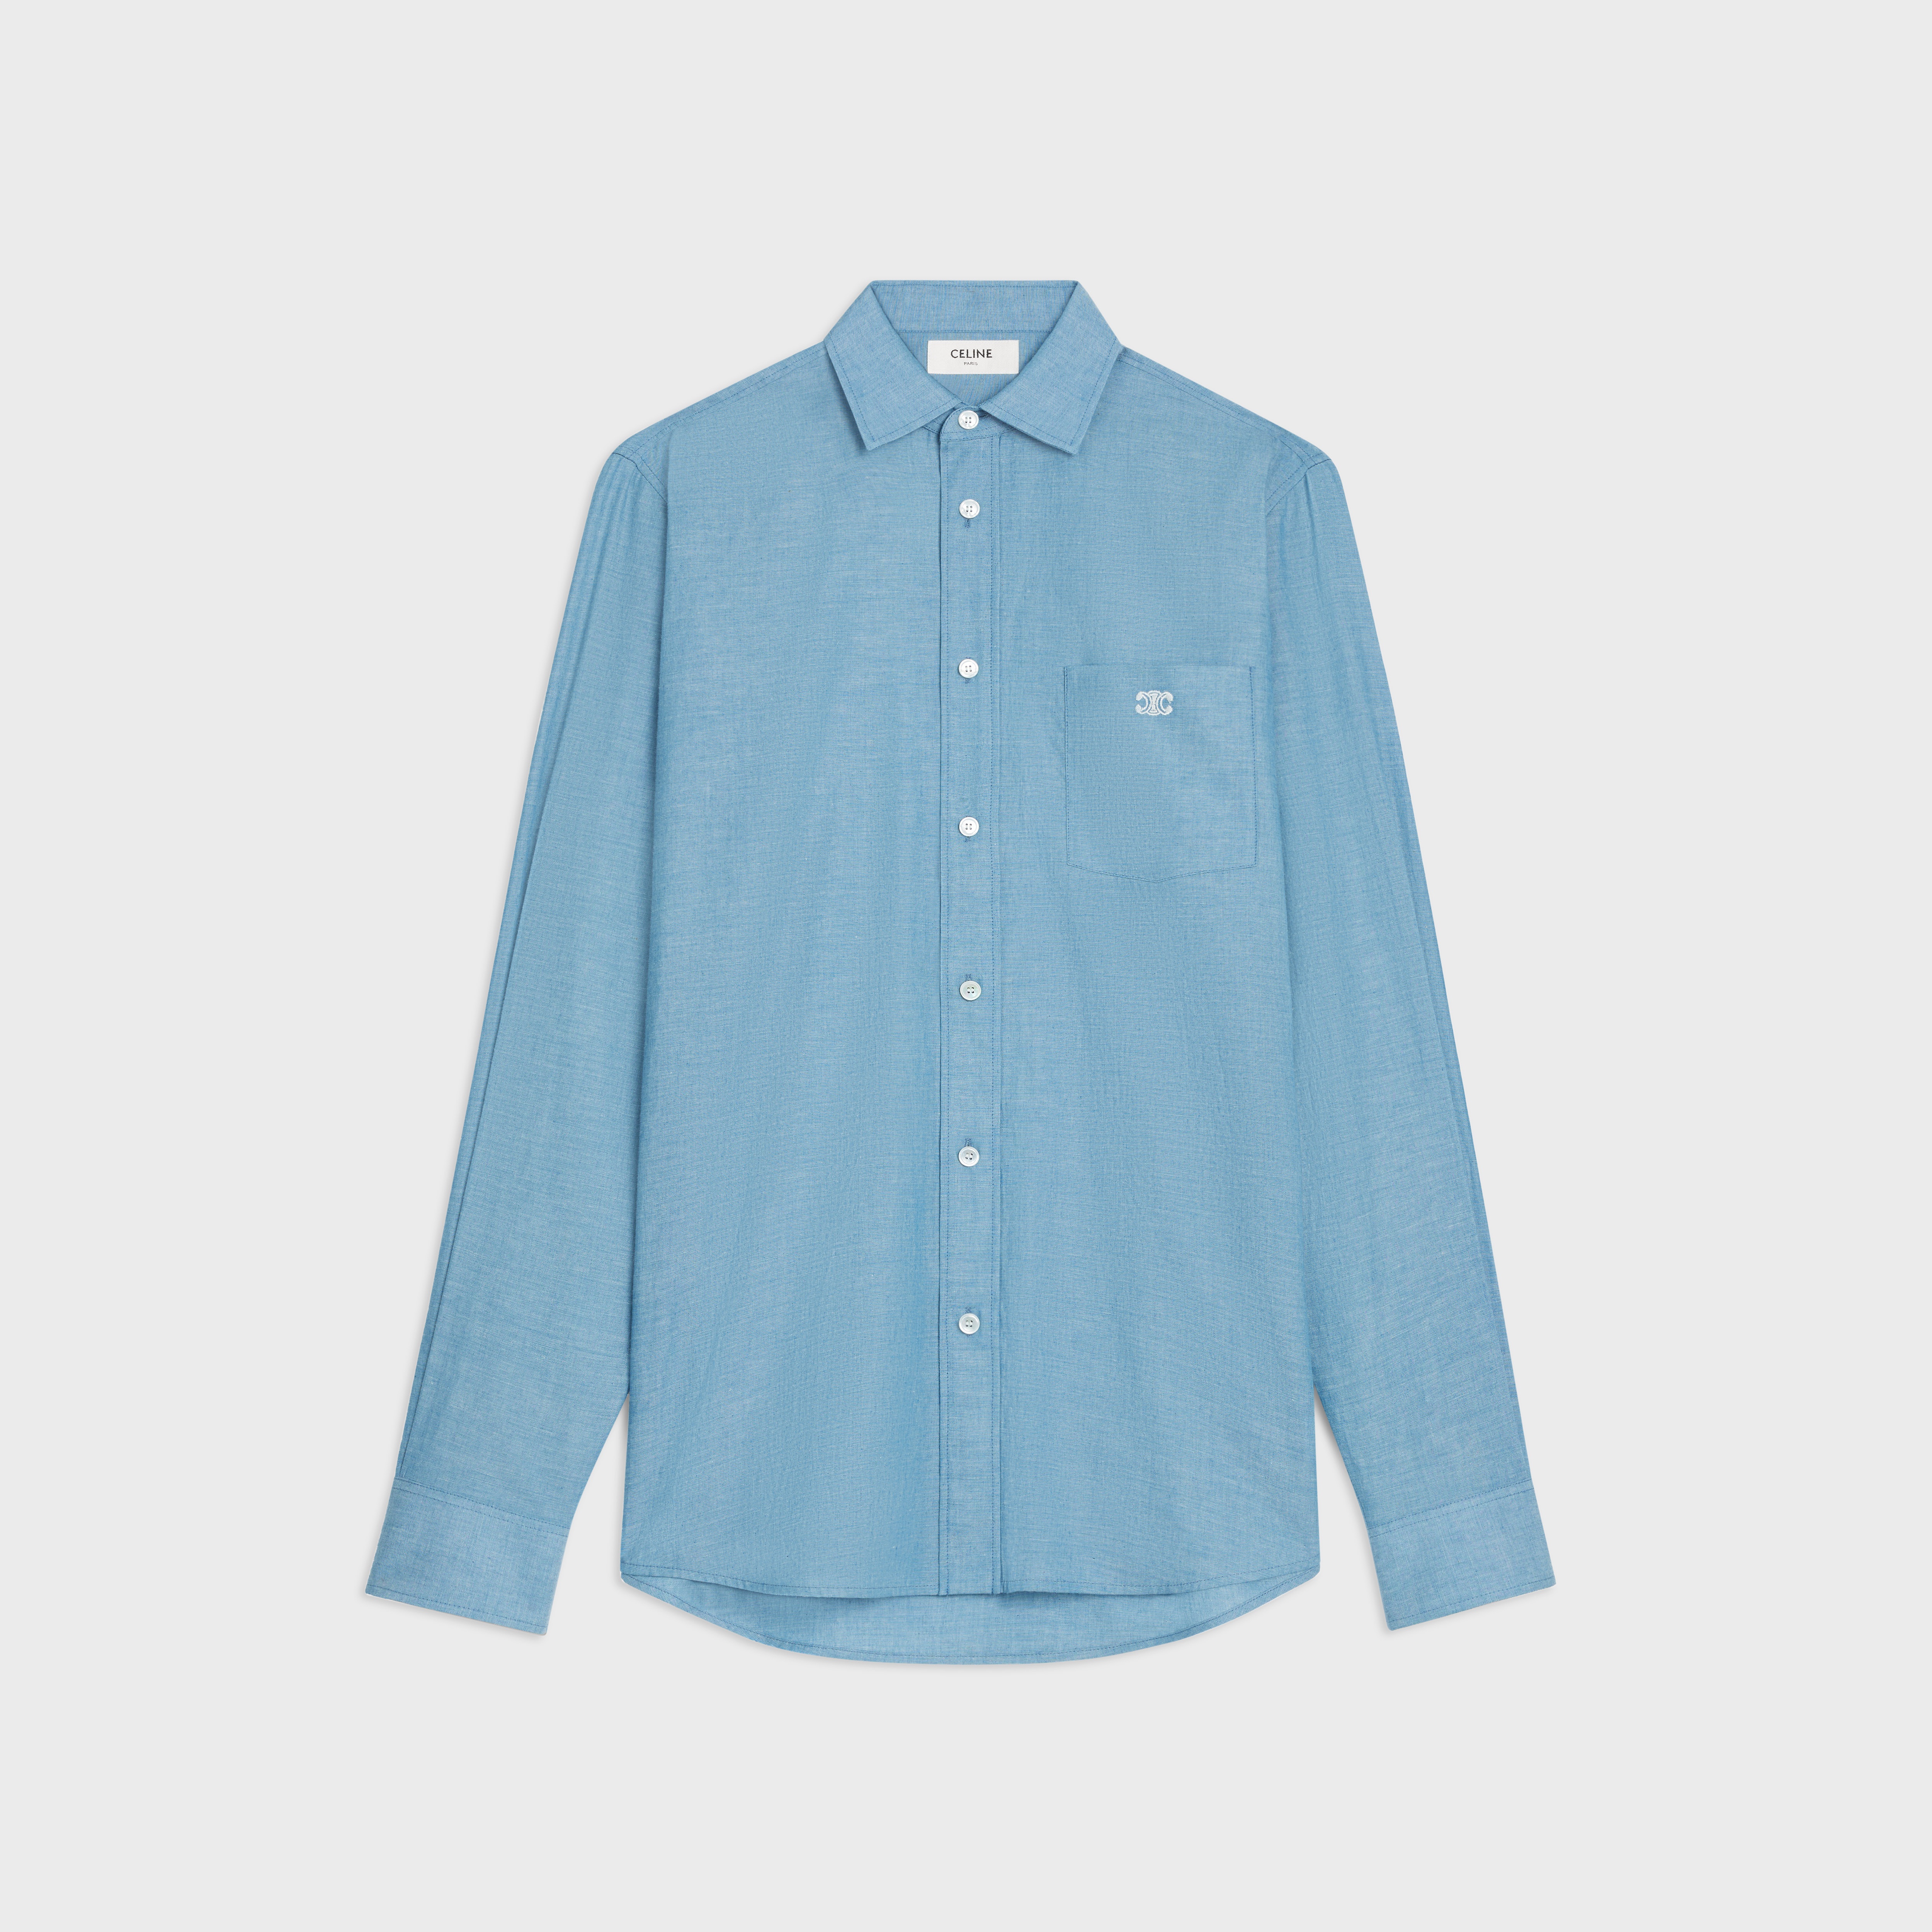 loose carnaby shirt in chambray cotton - 1